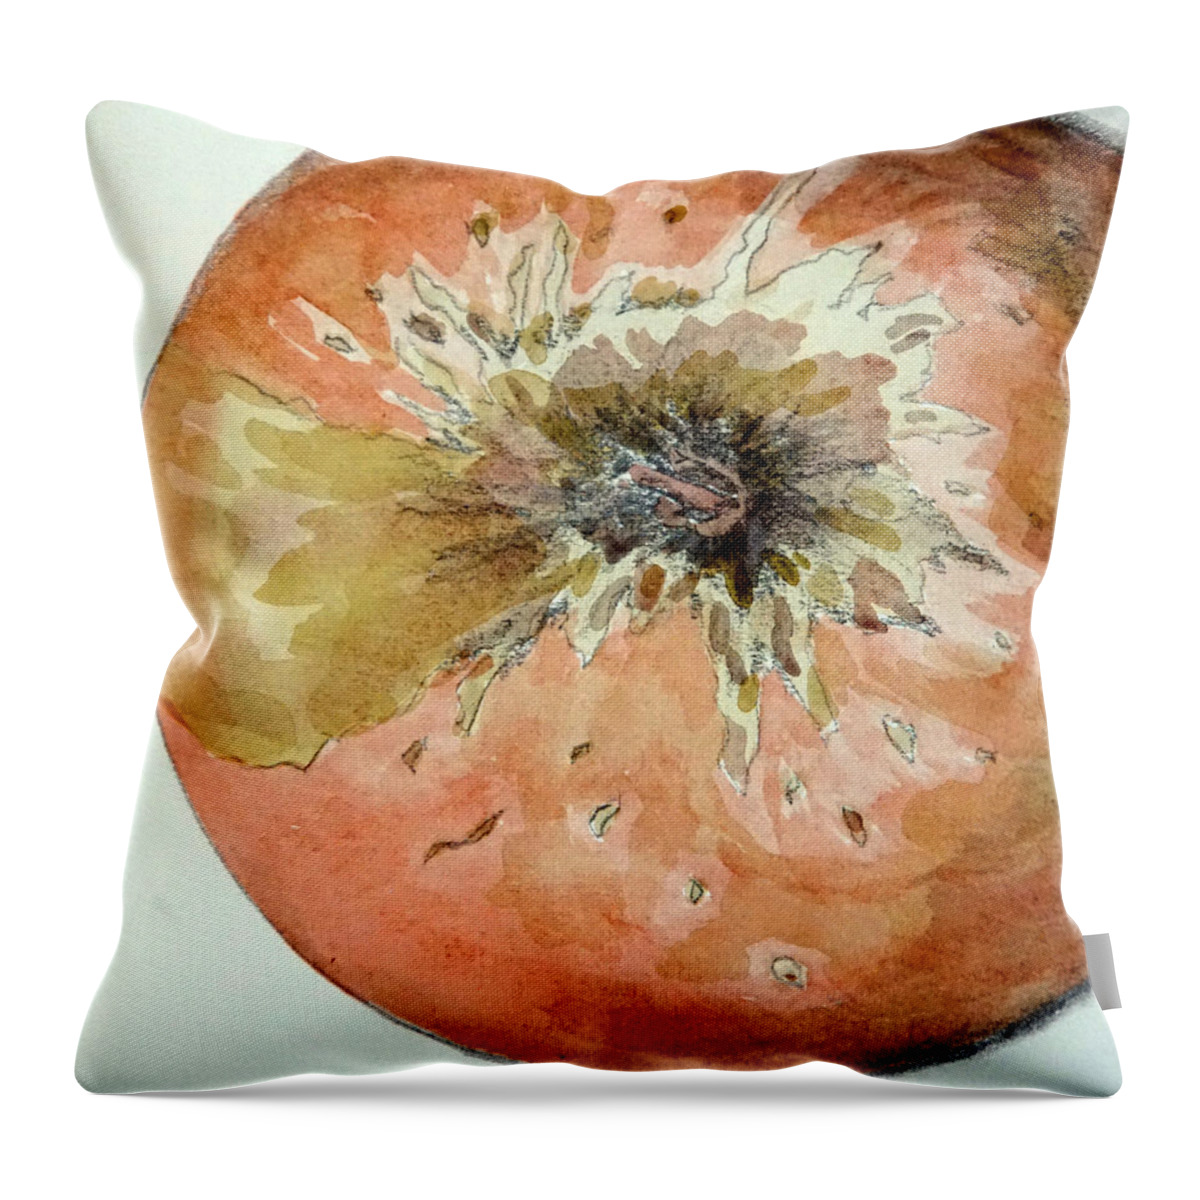 Apple Throw Pillow featuring the painting Apple by Jolly Van der Velden